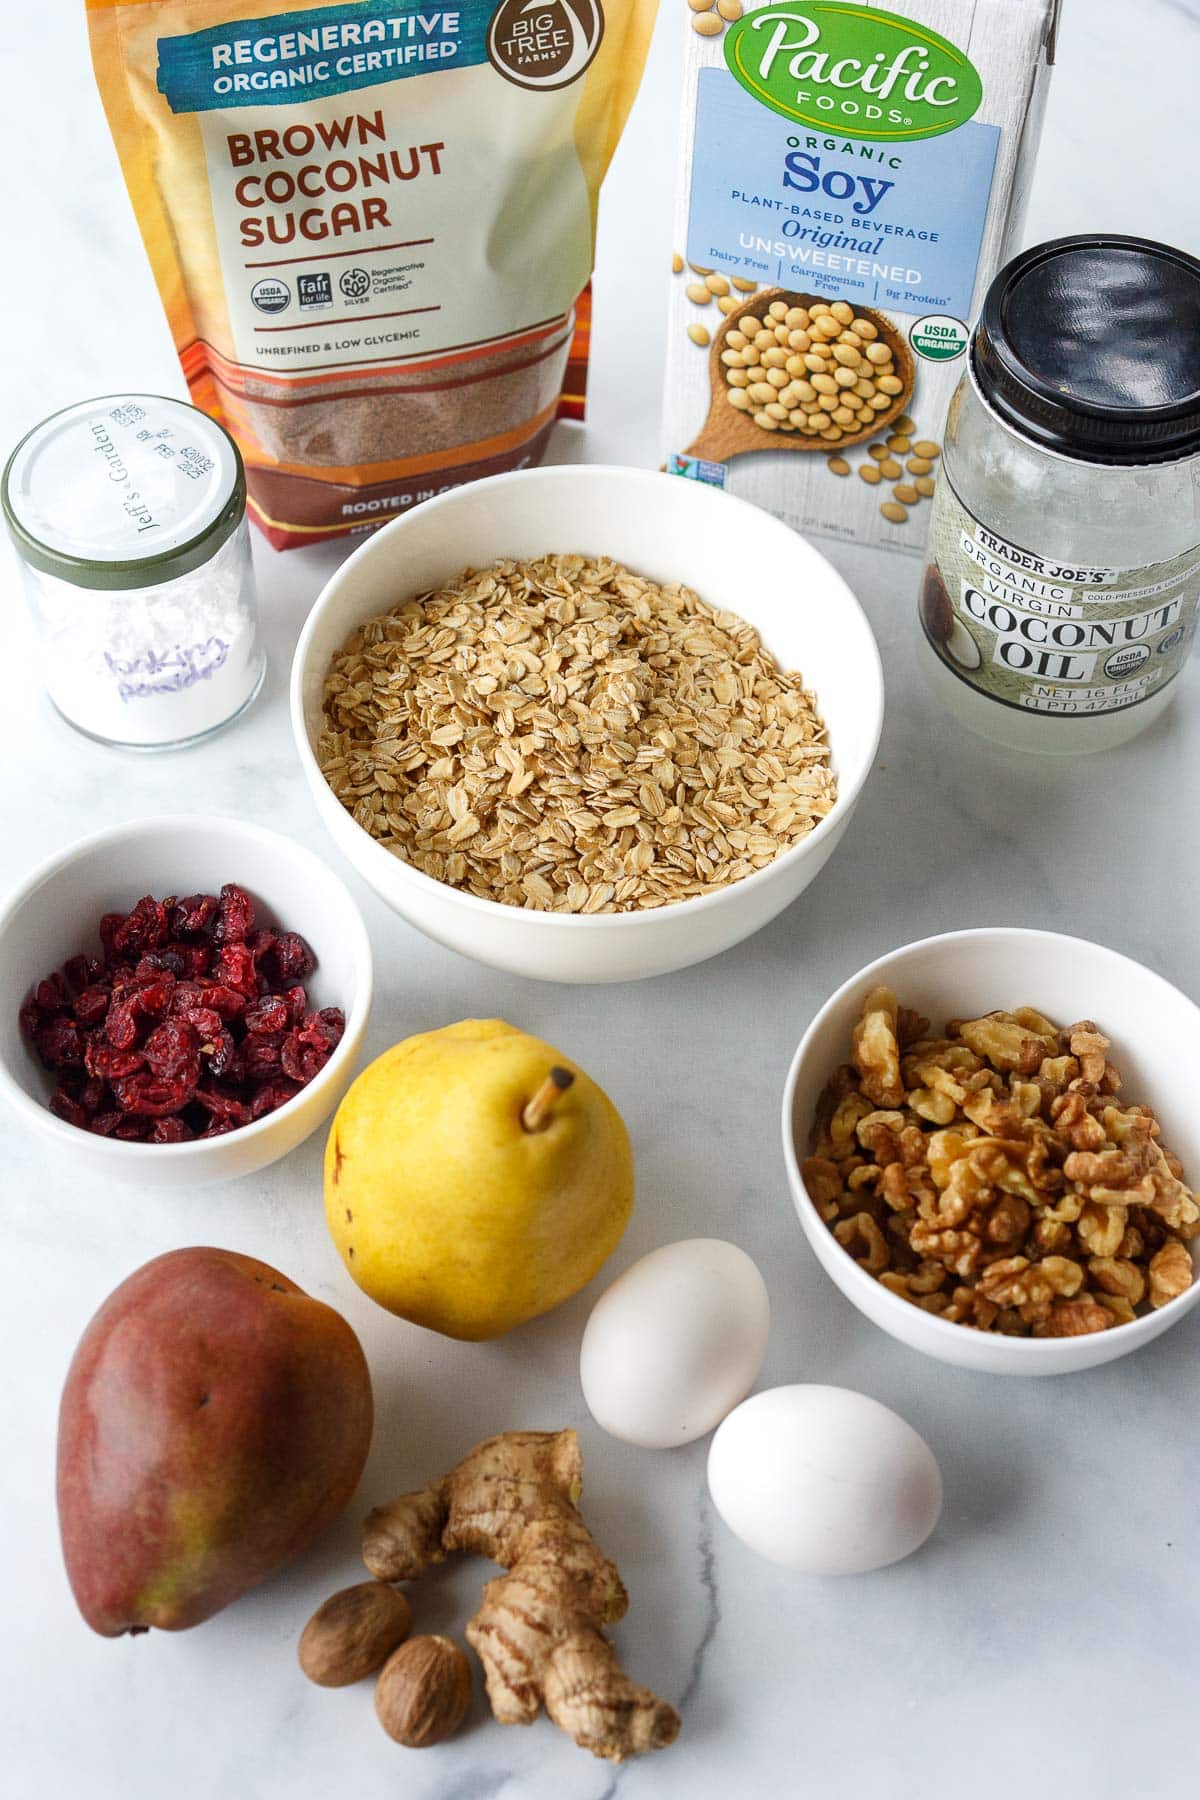 ingredients for baked oatmeal on marble surface - oats, walnuts, dried cranberries, pears, eggs, ginger, baking powder, brown sugar, soy milk, coconut oil